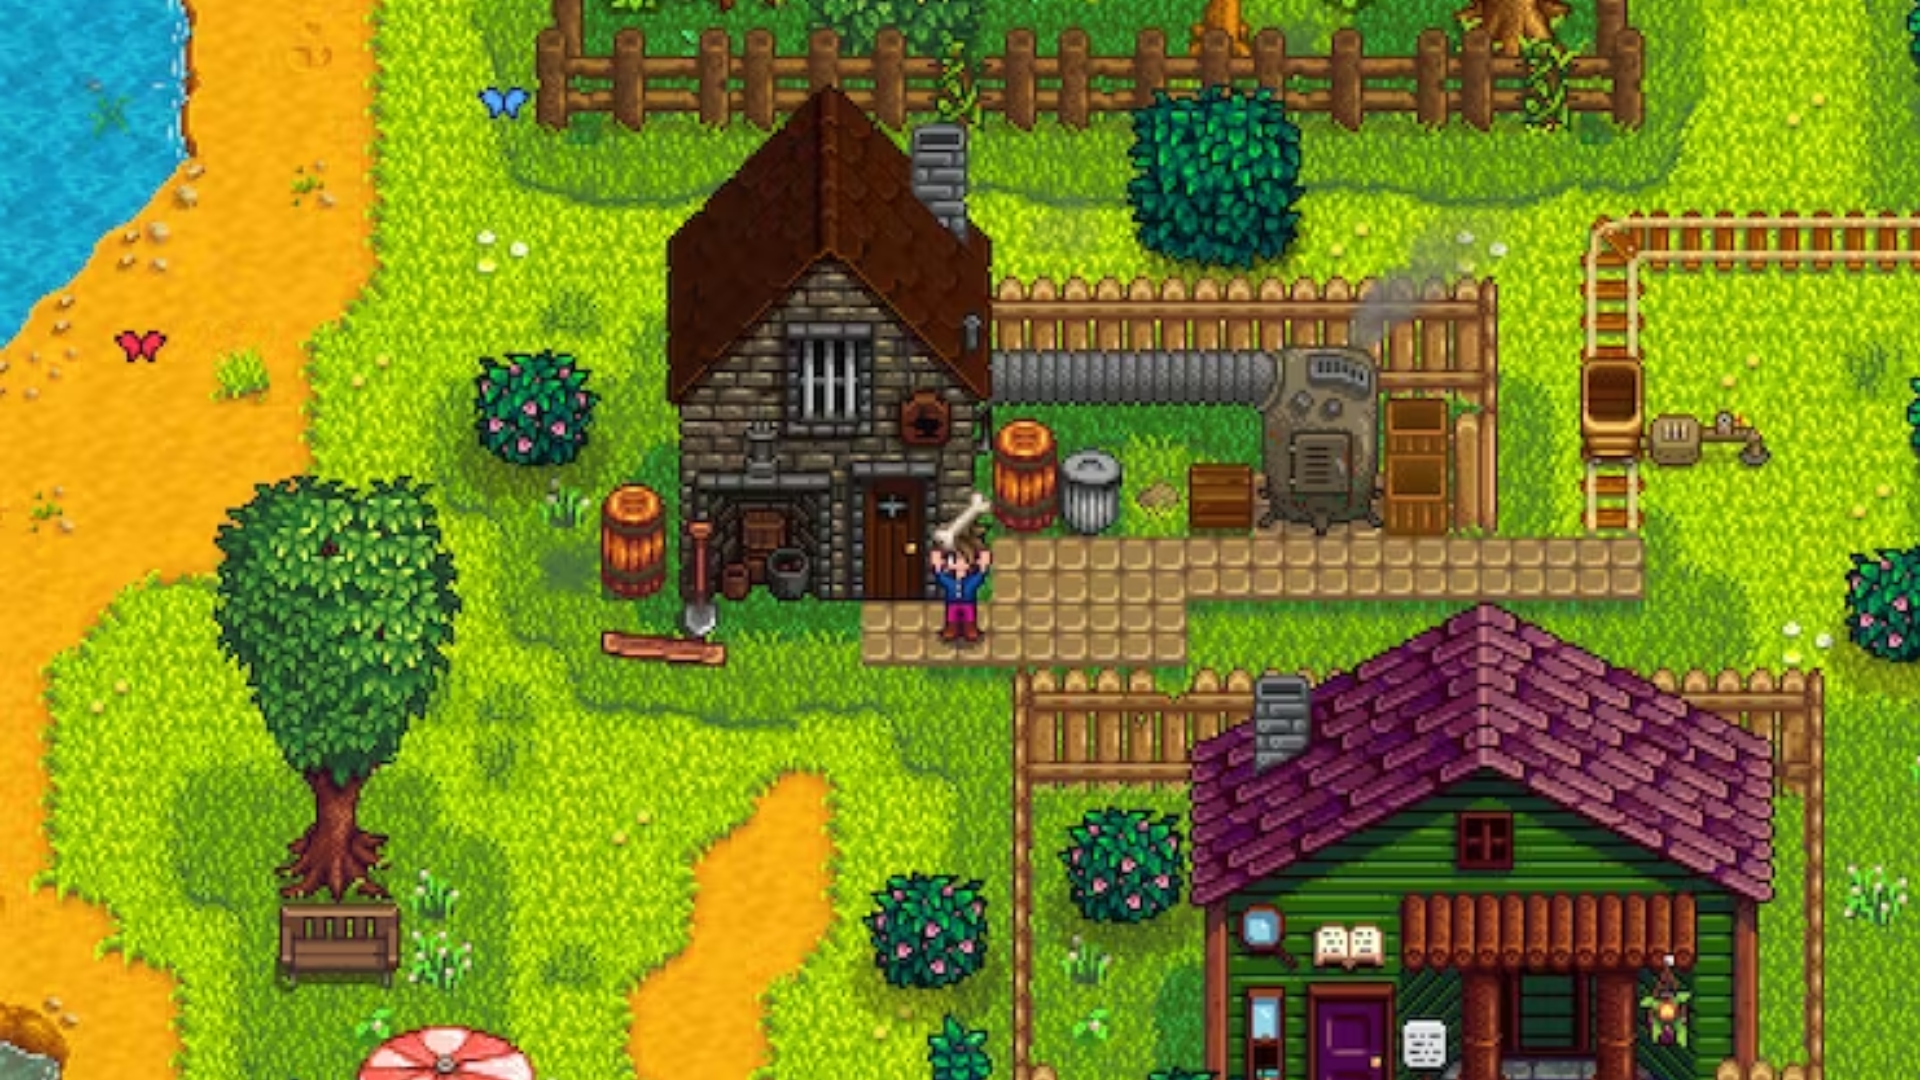 Best indie games: Stardew Valley. Image shows a character walking around holding a bone near their farm.